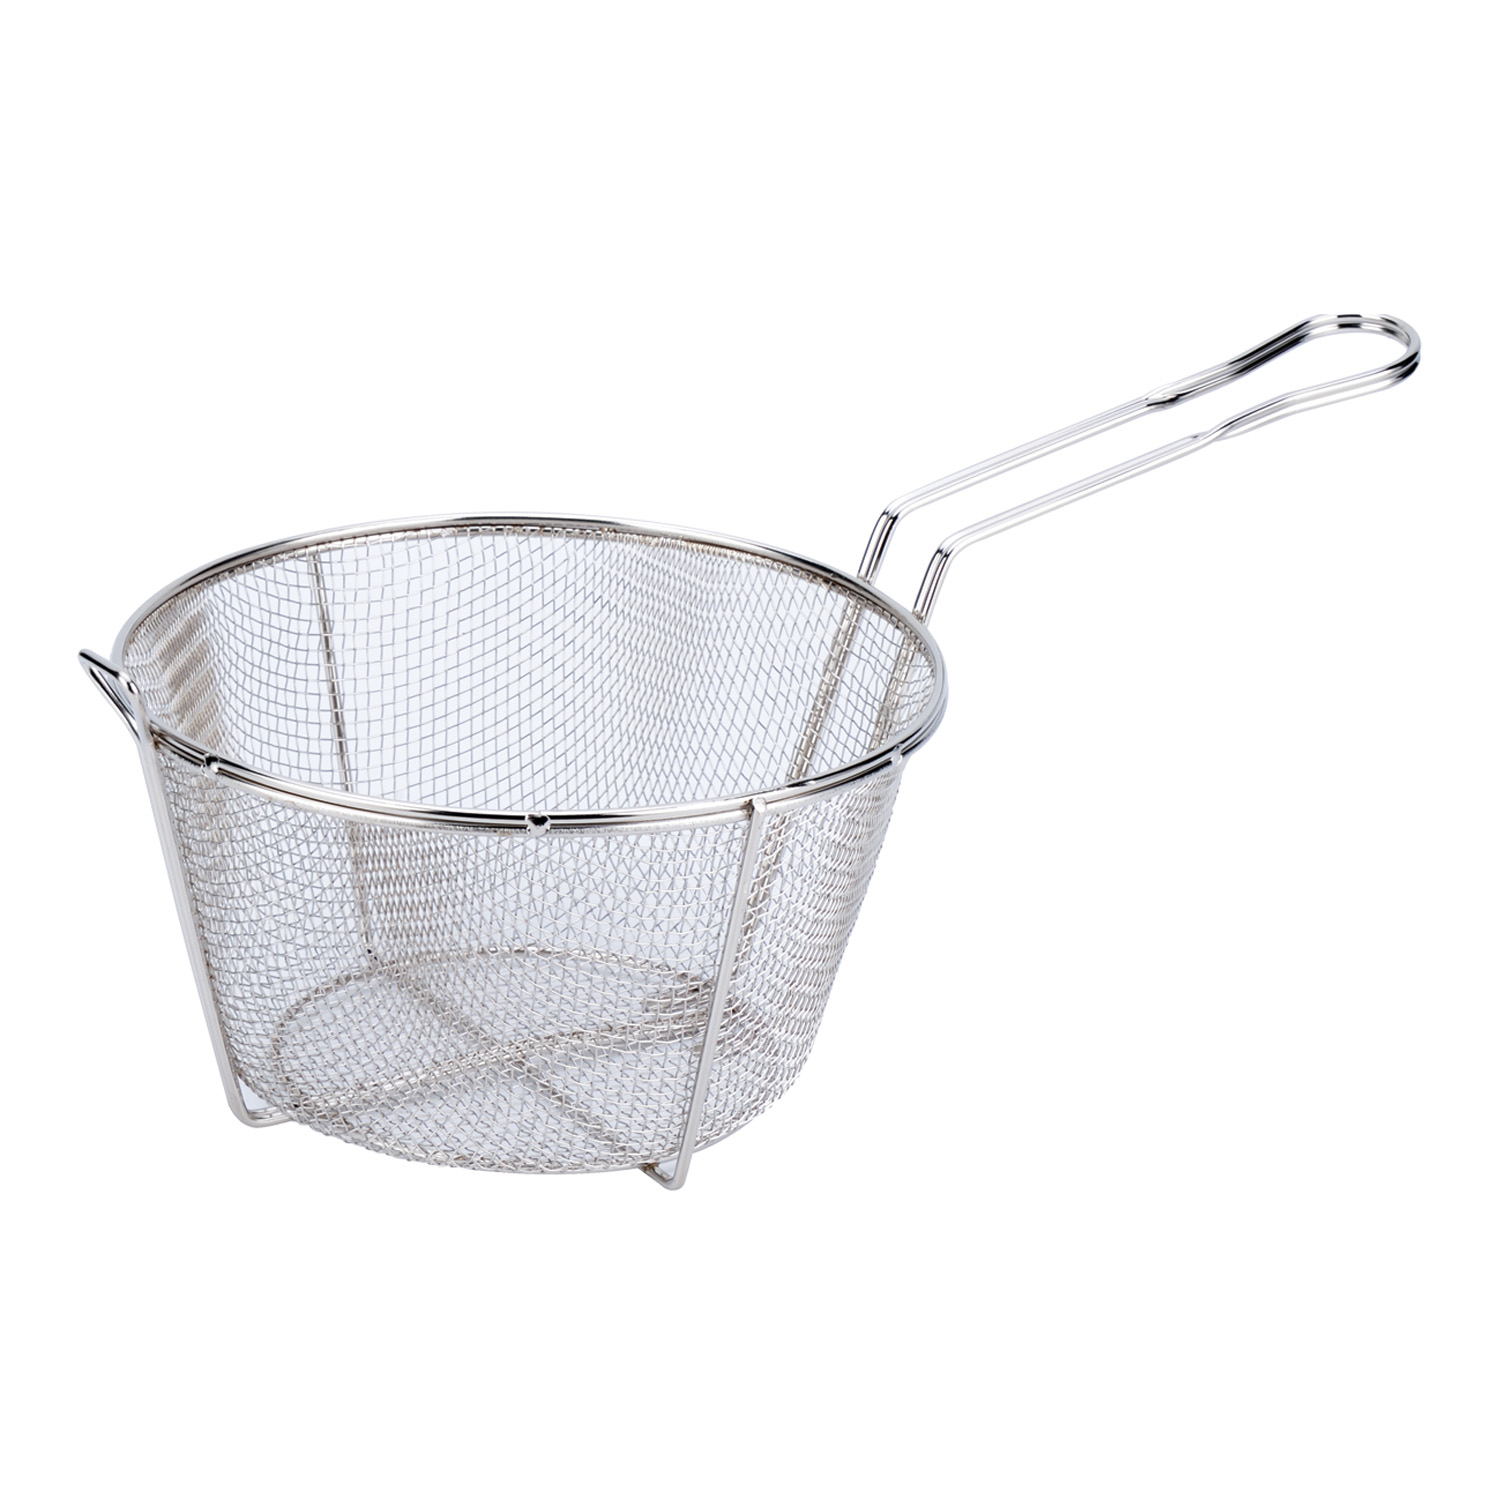 CAC China FBR8-008 Nickel-Plated Fry Basket, 1/8" Mesh Wire 8-1/2"Dia